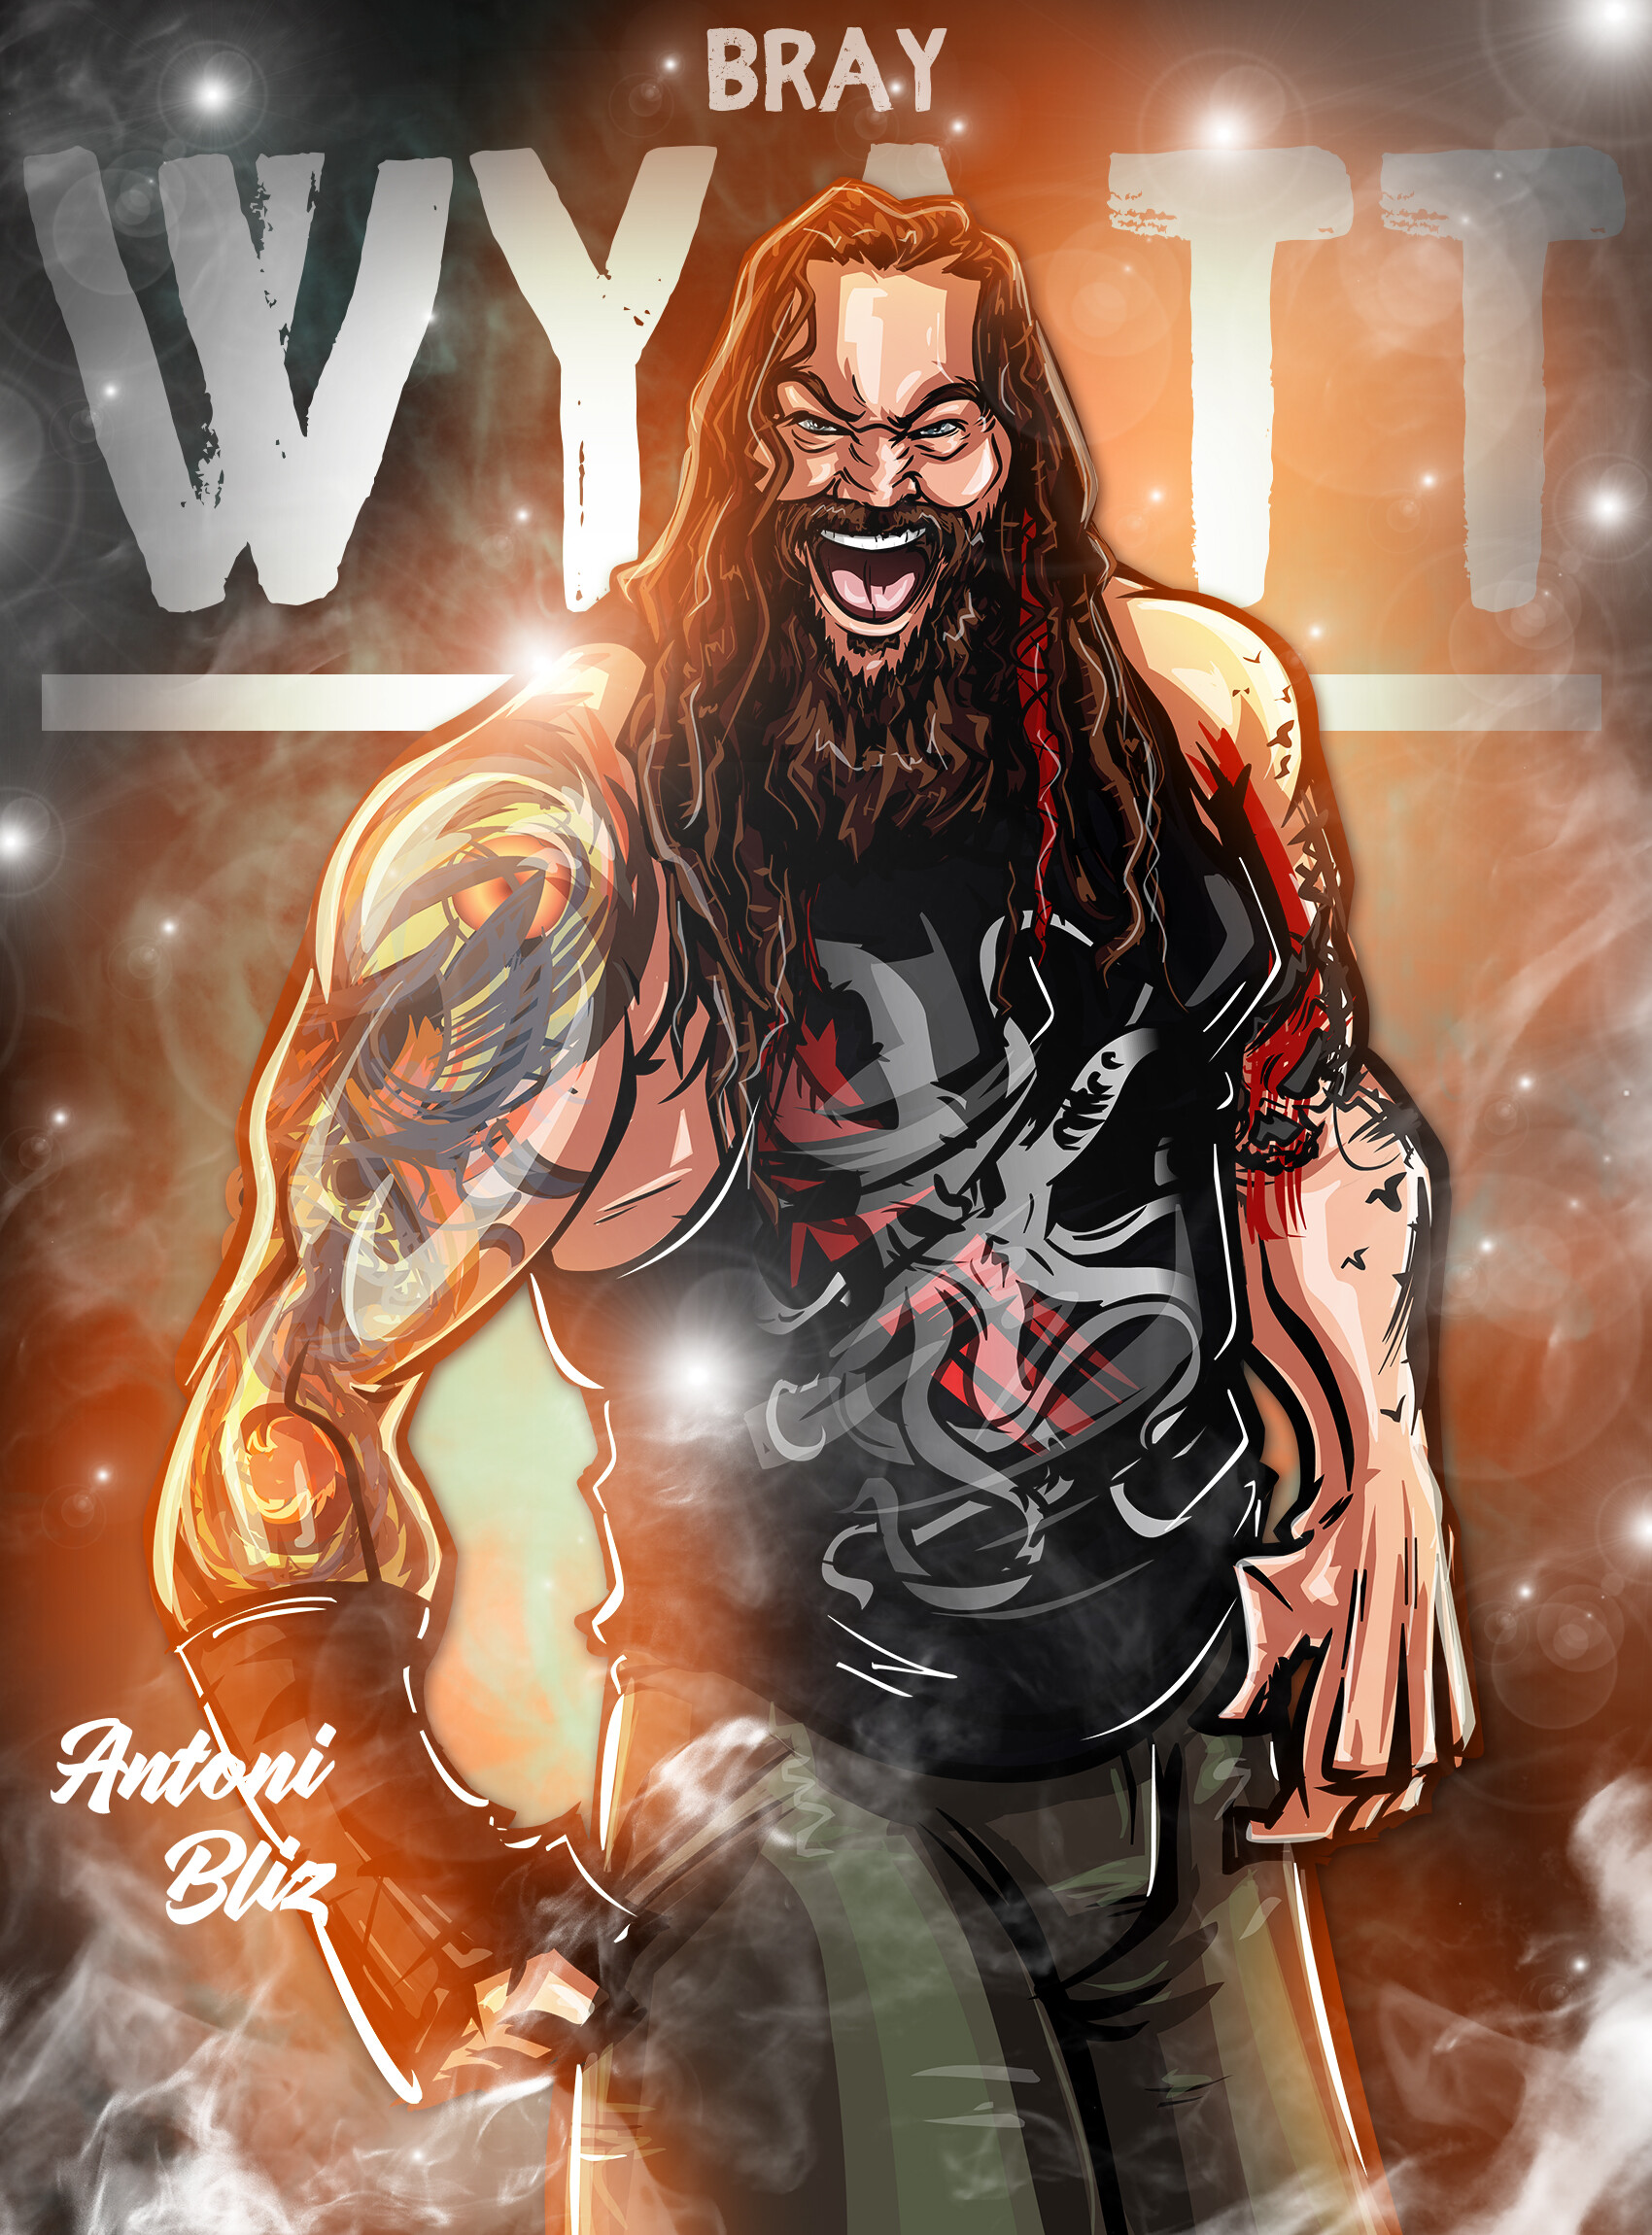 Concept Art Released For Terrifying Scrapped Bray Wyatt Character [Photo]